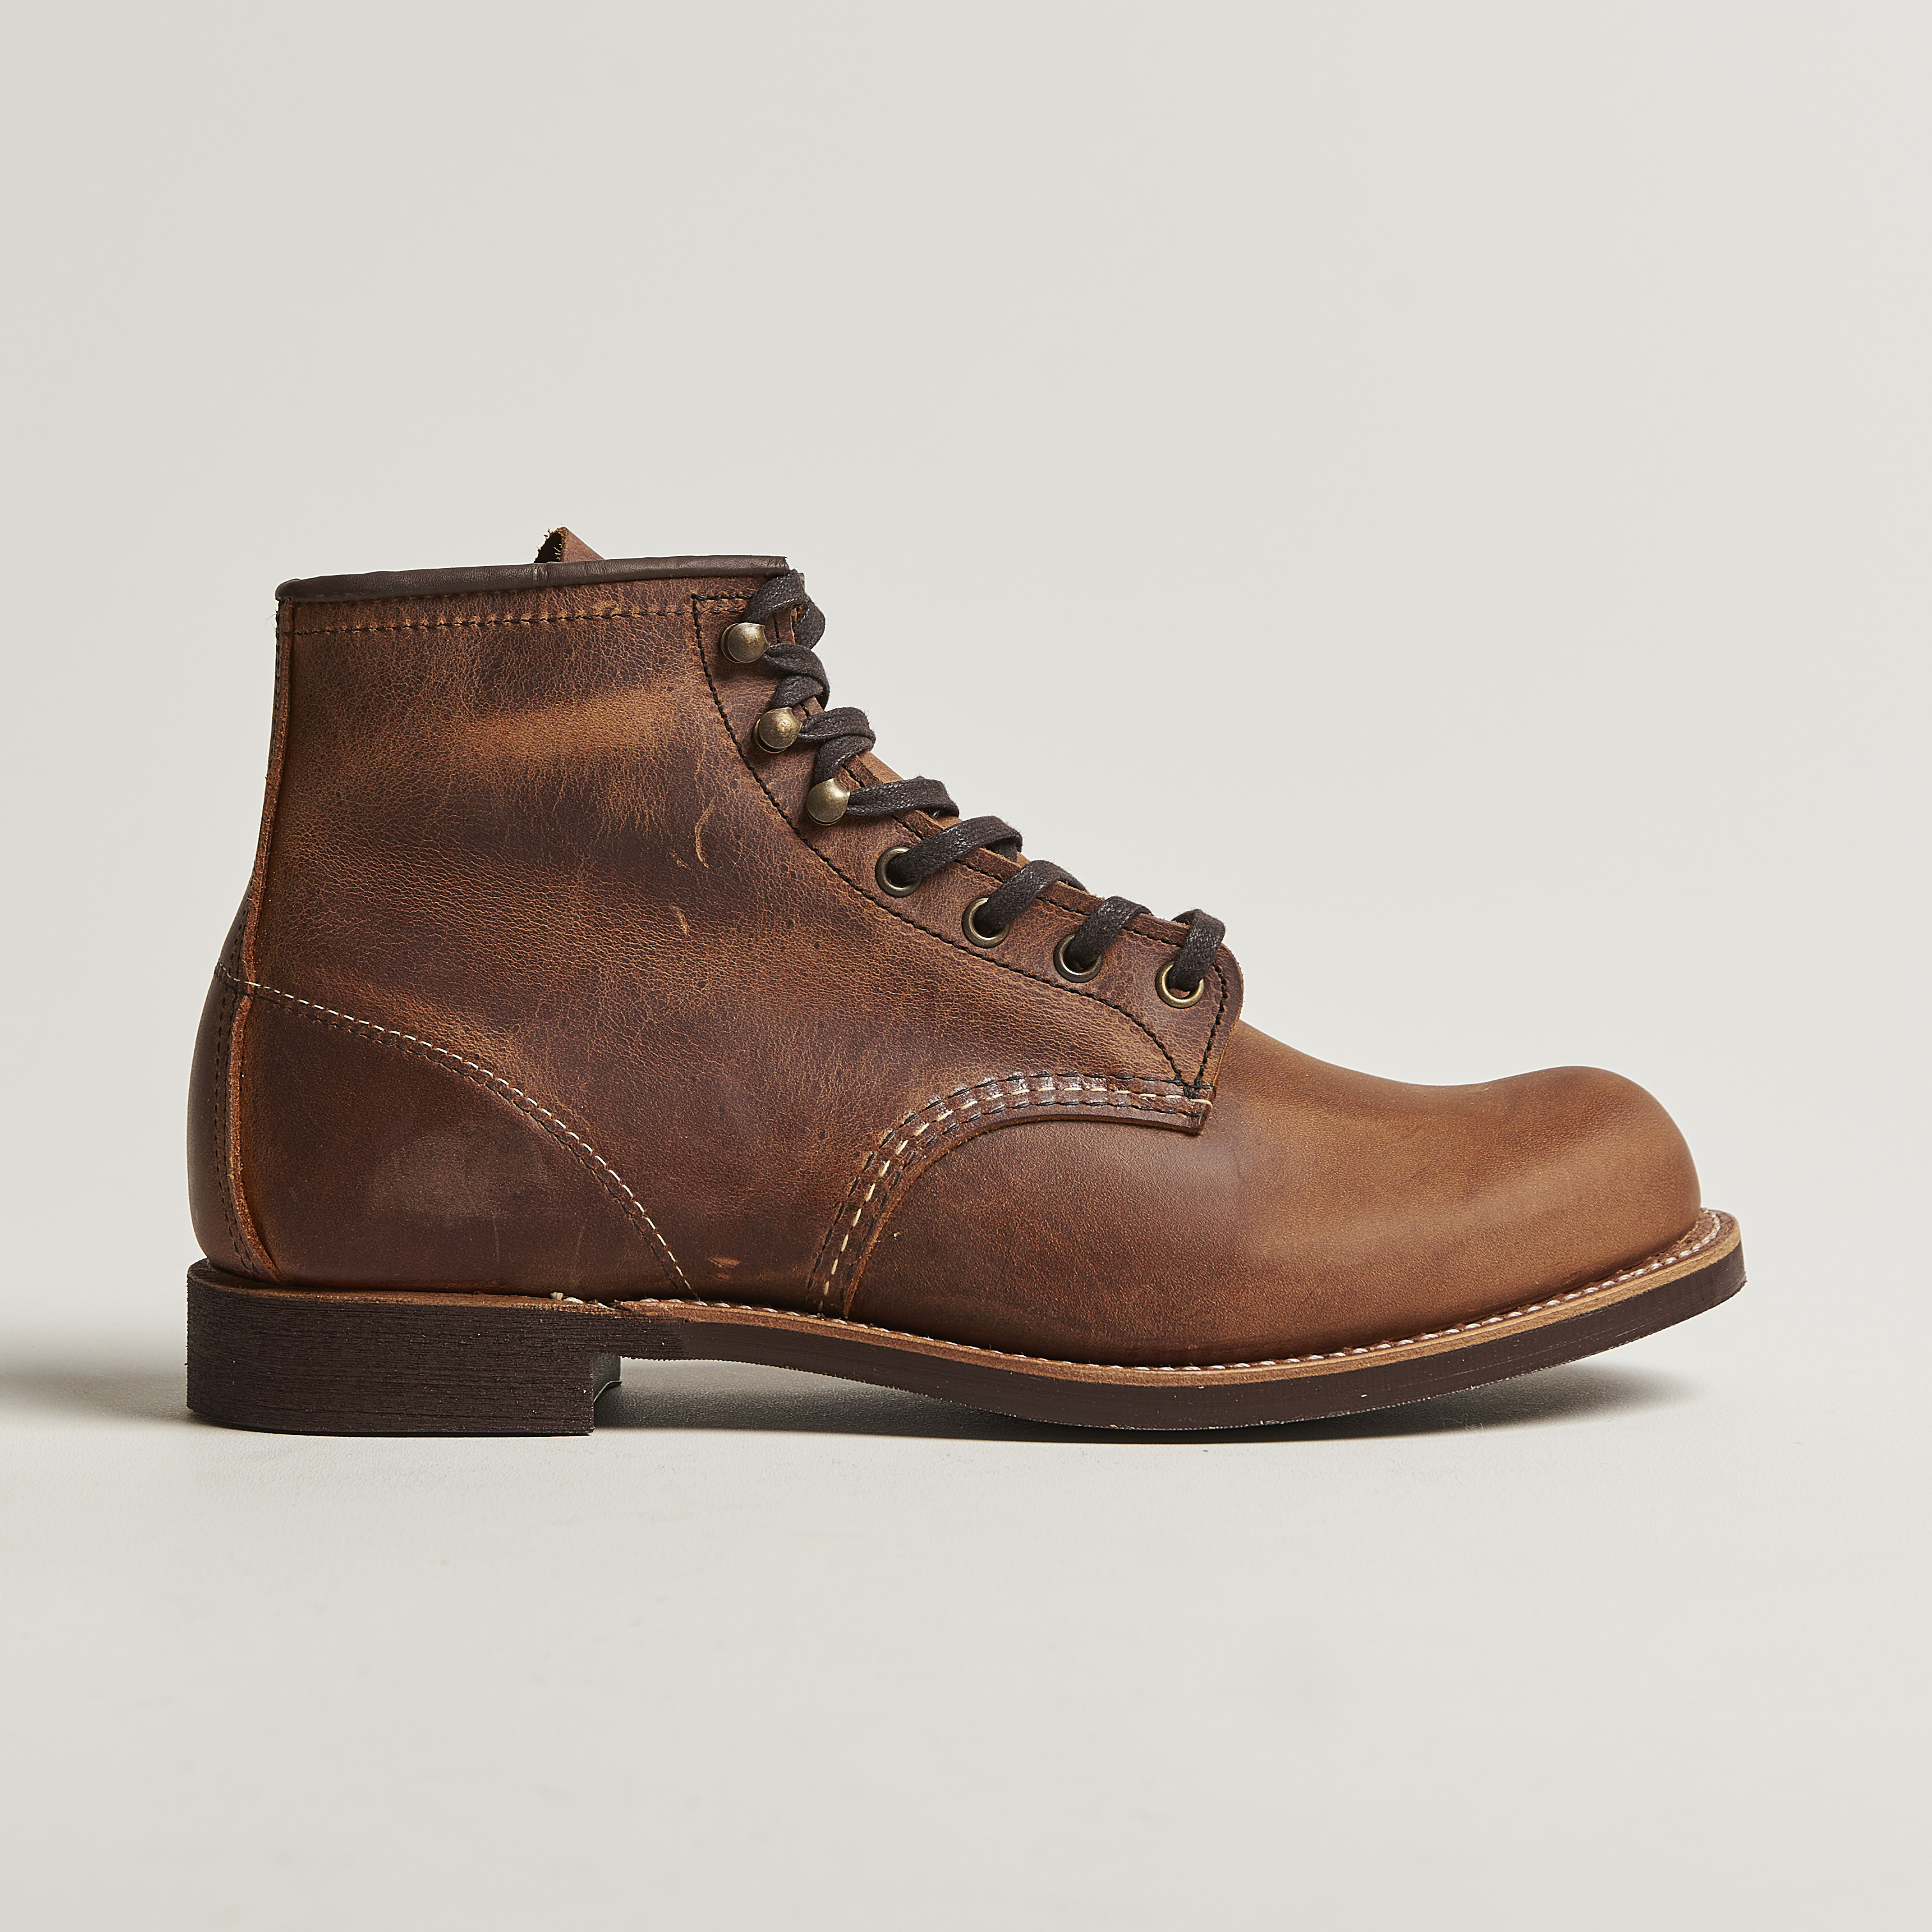 Red Wing Shoes Blacksmith Boot Cooper Rough/Tough Leather at CareOfCarl.com